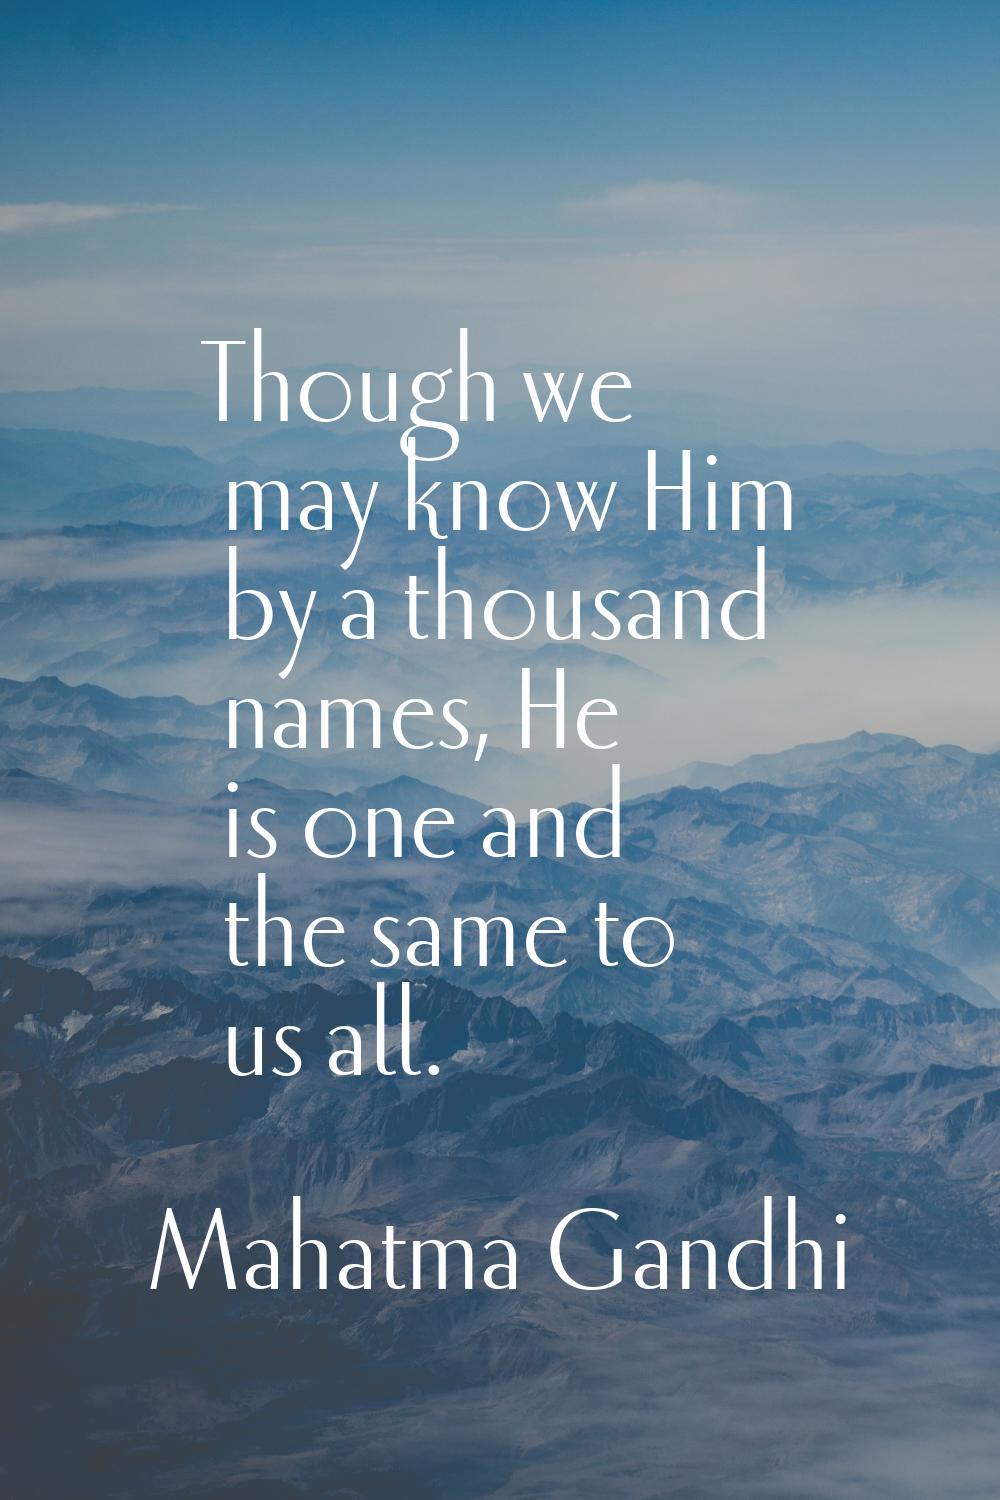 Though we may know Him by a thousand names, He is one and the same to us all.